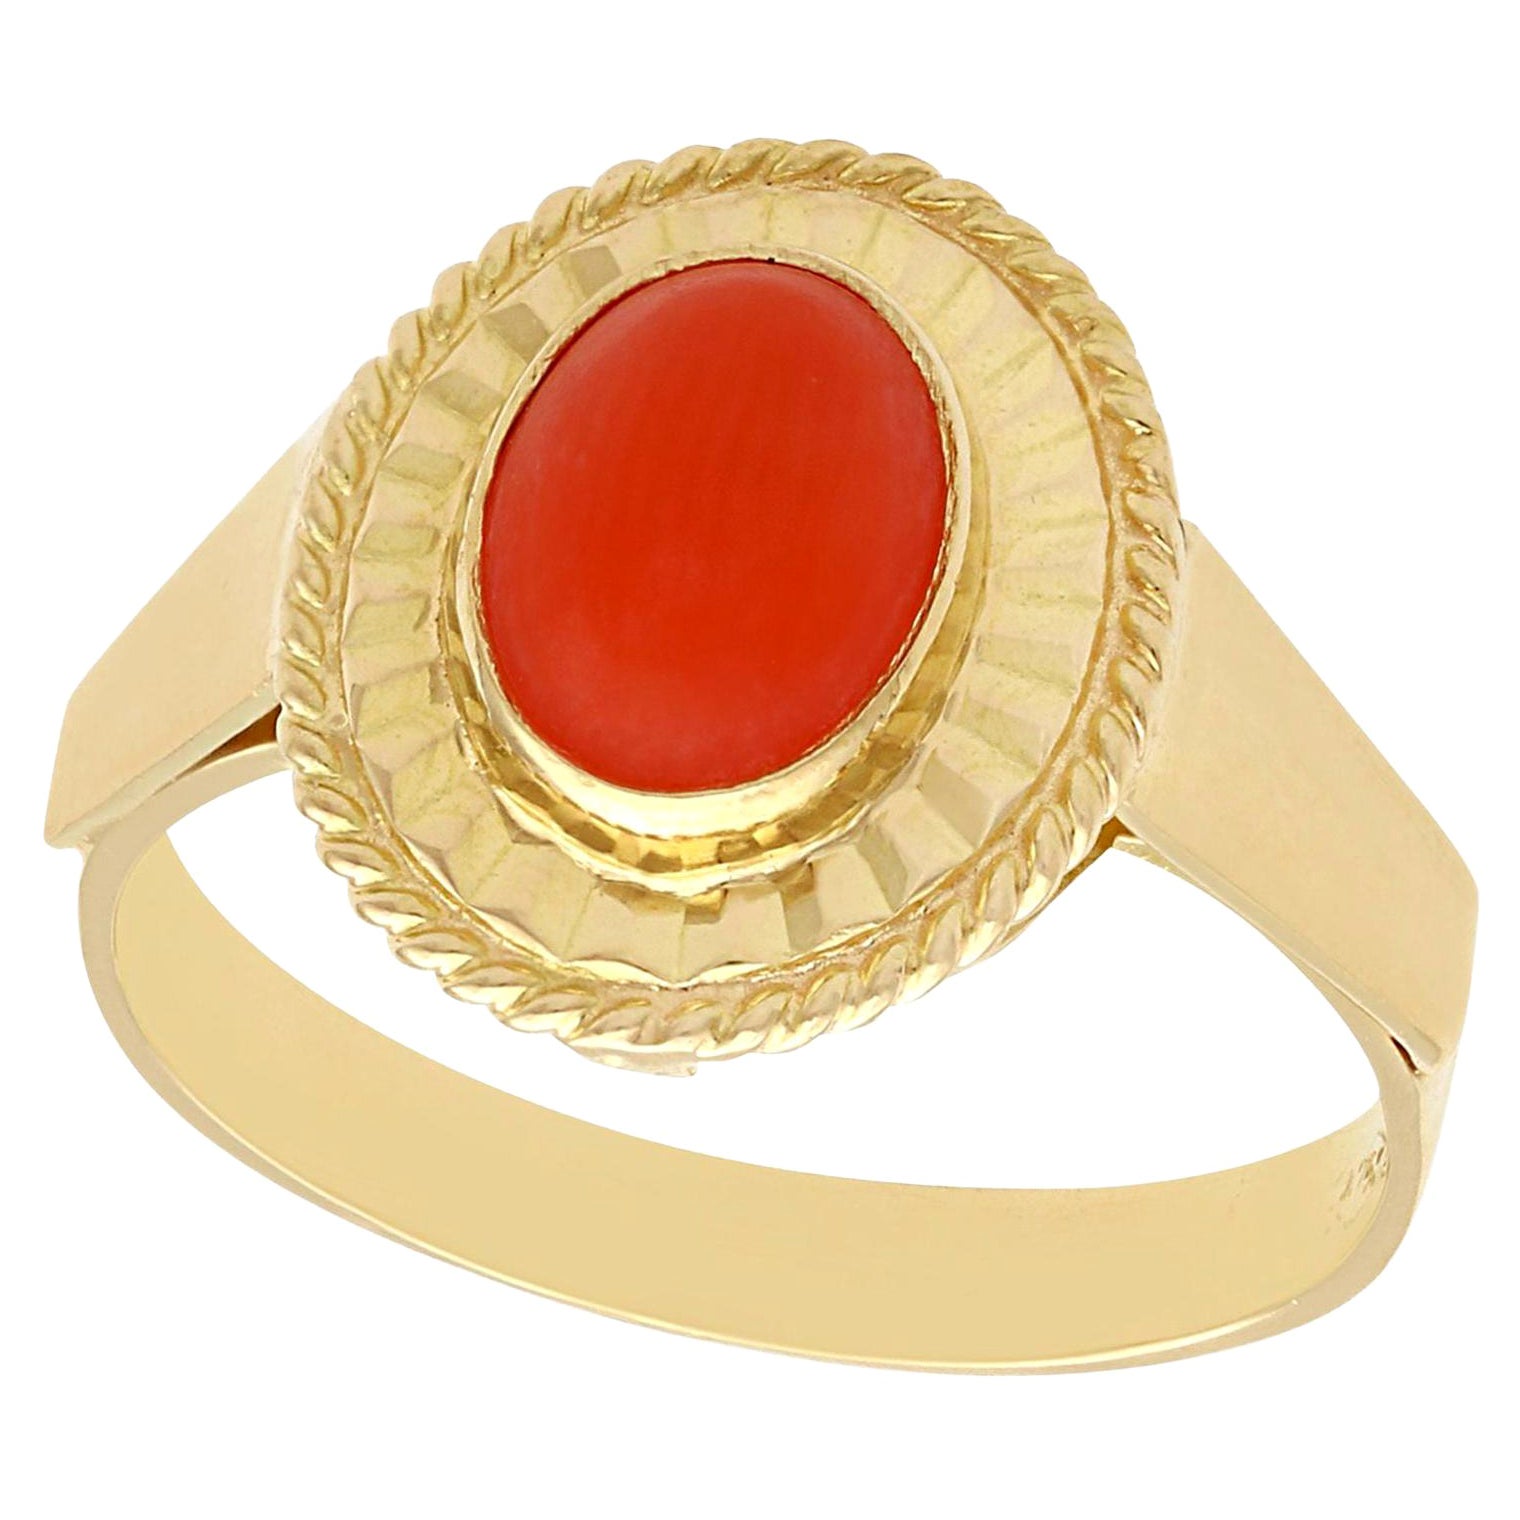 Vintage Cabochon Cut Coral and Yellow Gold Cocktail Ring